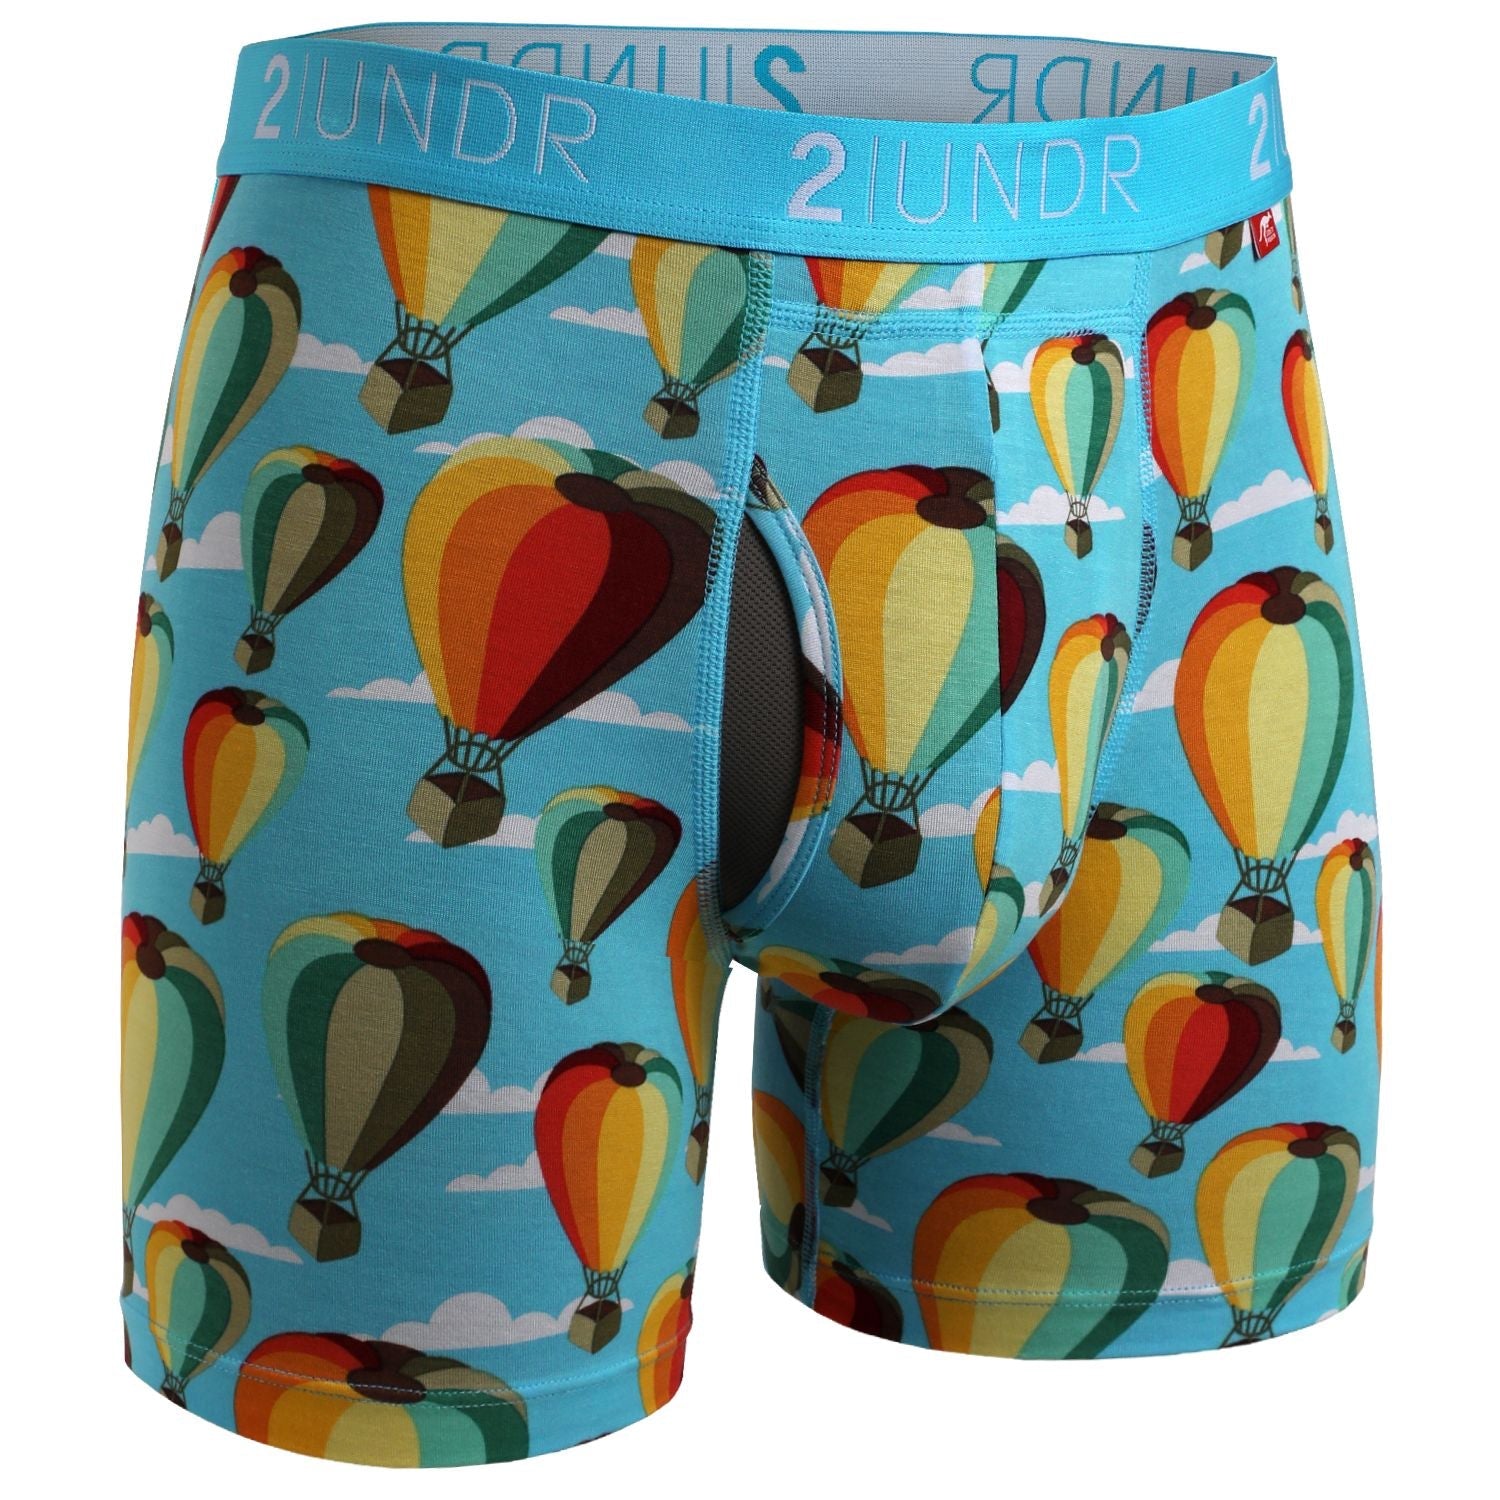 2Undr Swing Shift Boxer Brief Prints - Hot Air - My Filosophy